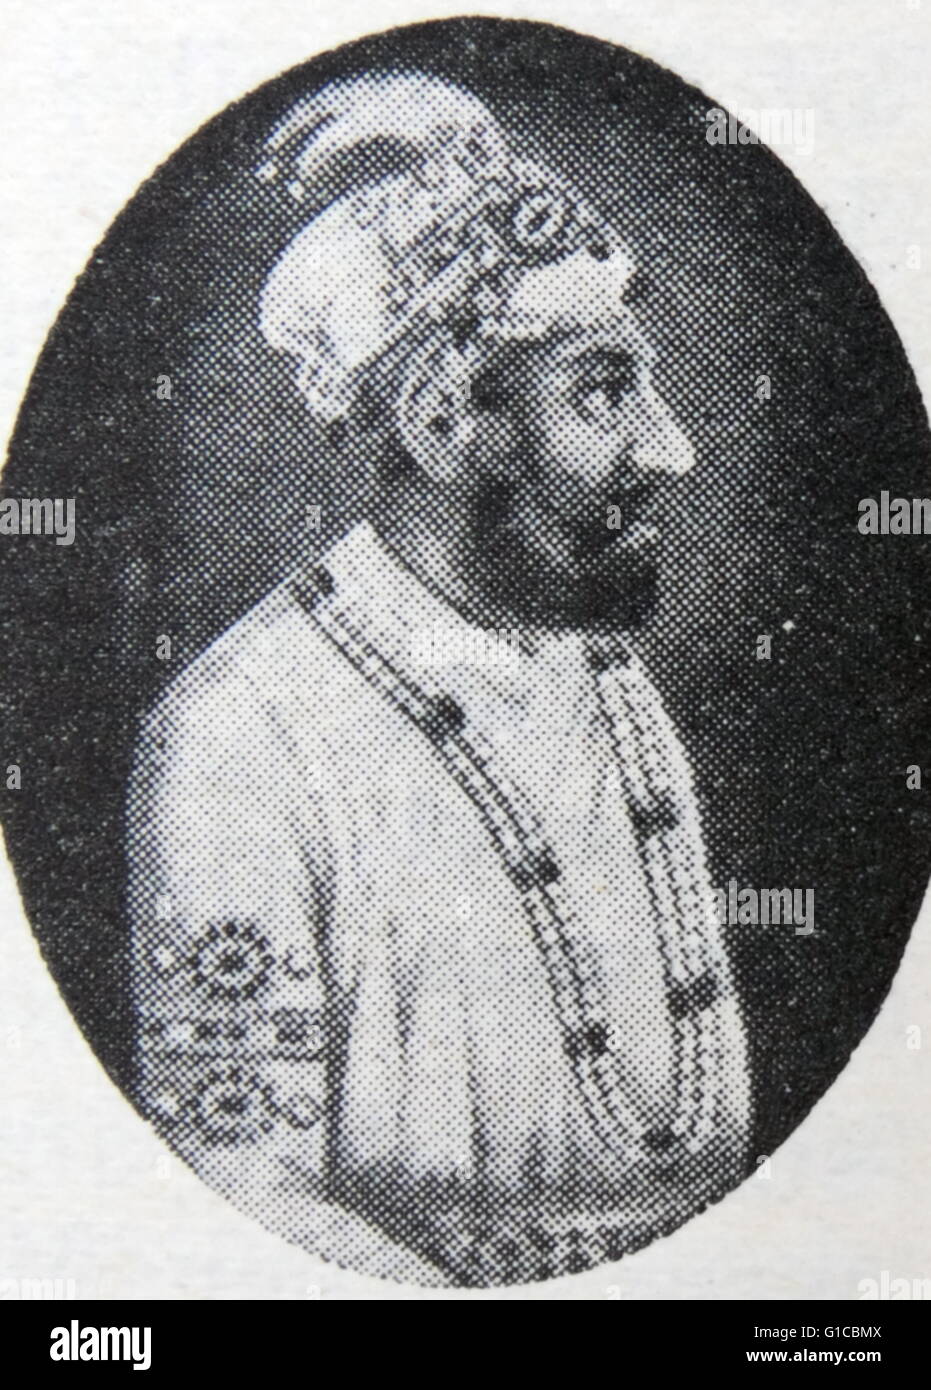 Portrait of Shah Jahan II (1696-1719) a Mughal Emperor. Dated 18th Century Stock Photo